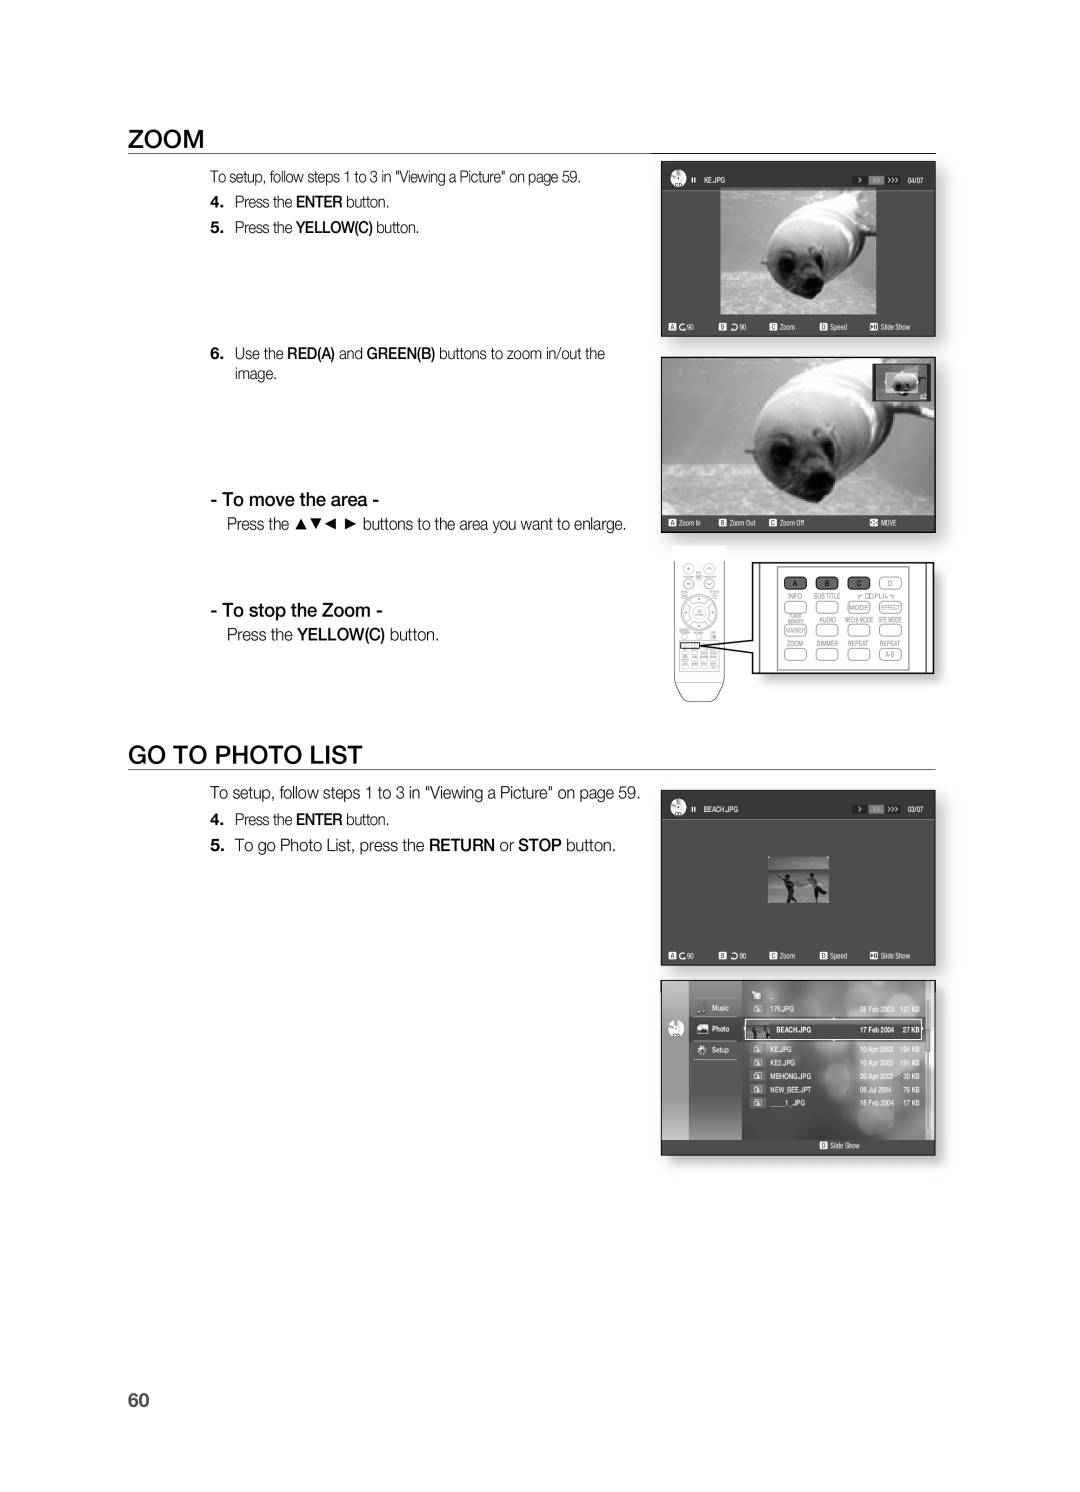 Samsung HT-BD2 manual Go To Photo List, To move the area, To stop the Zoom 